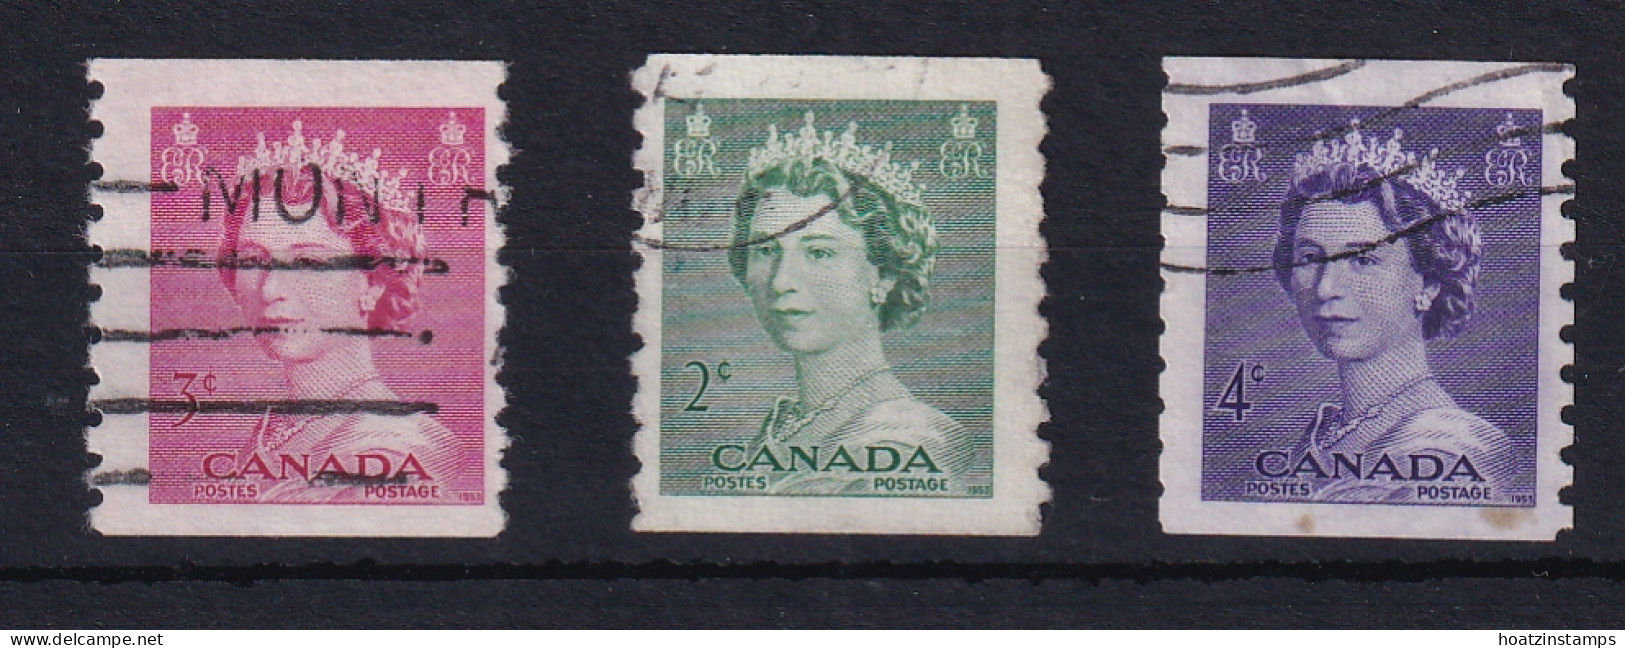 Canada: 1953   QE II - Coil Stamps Set   SG455-457  [Imperf X 9½]   Used - Gebraucht